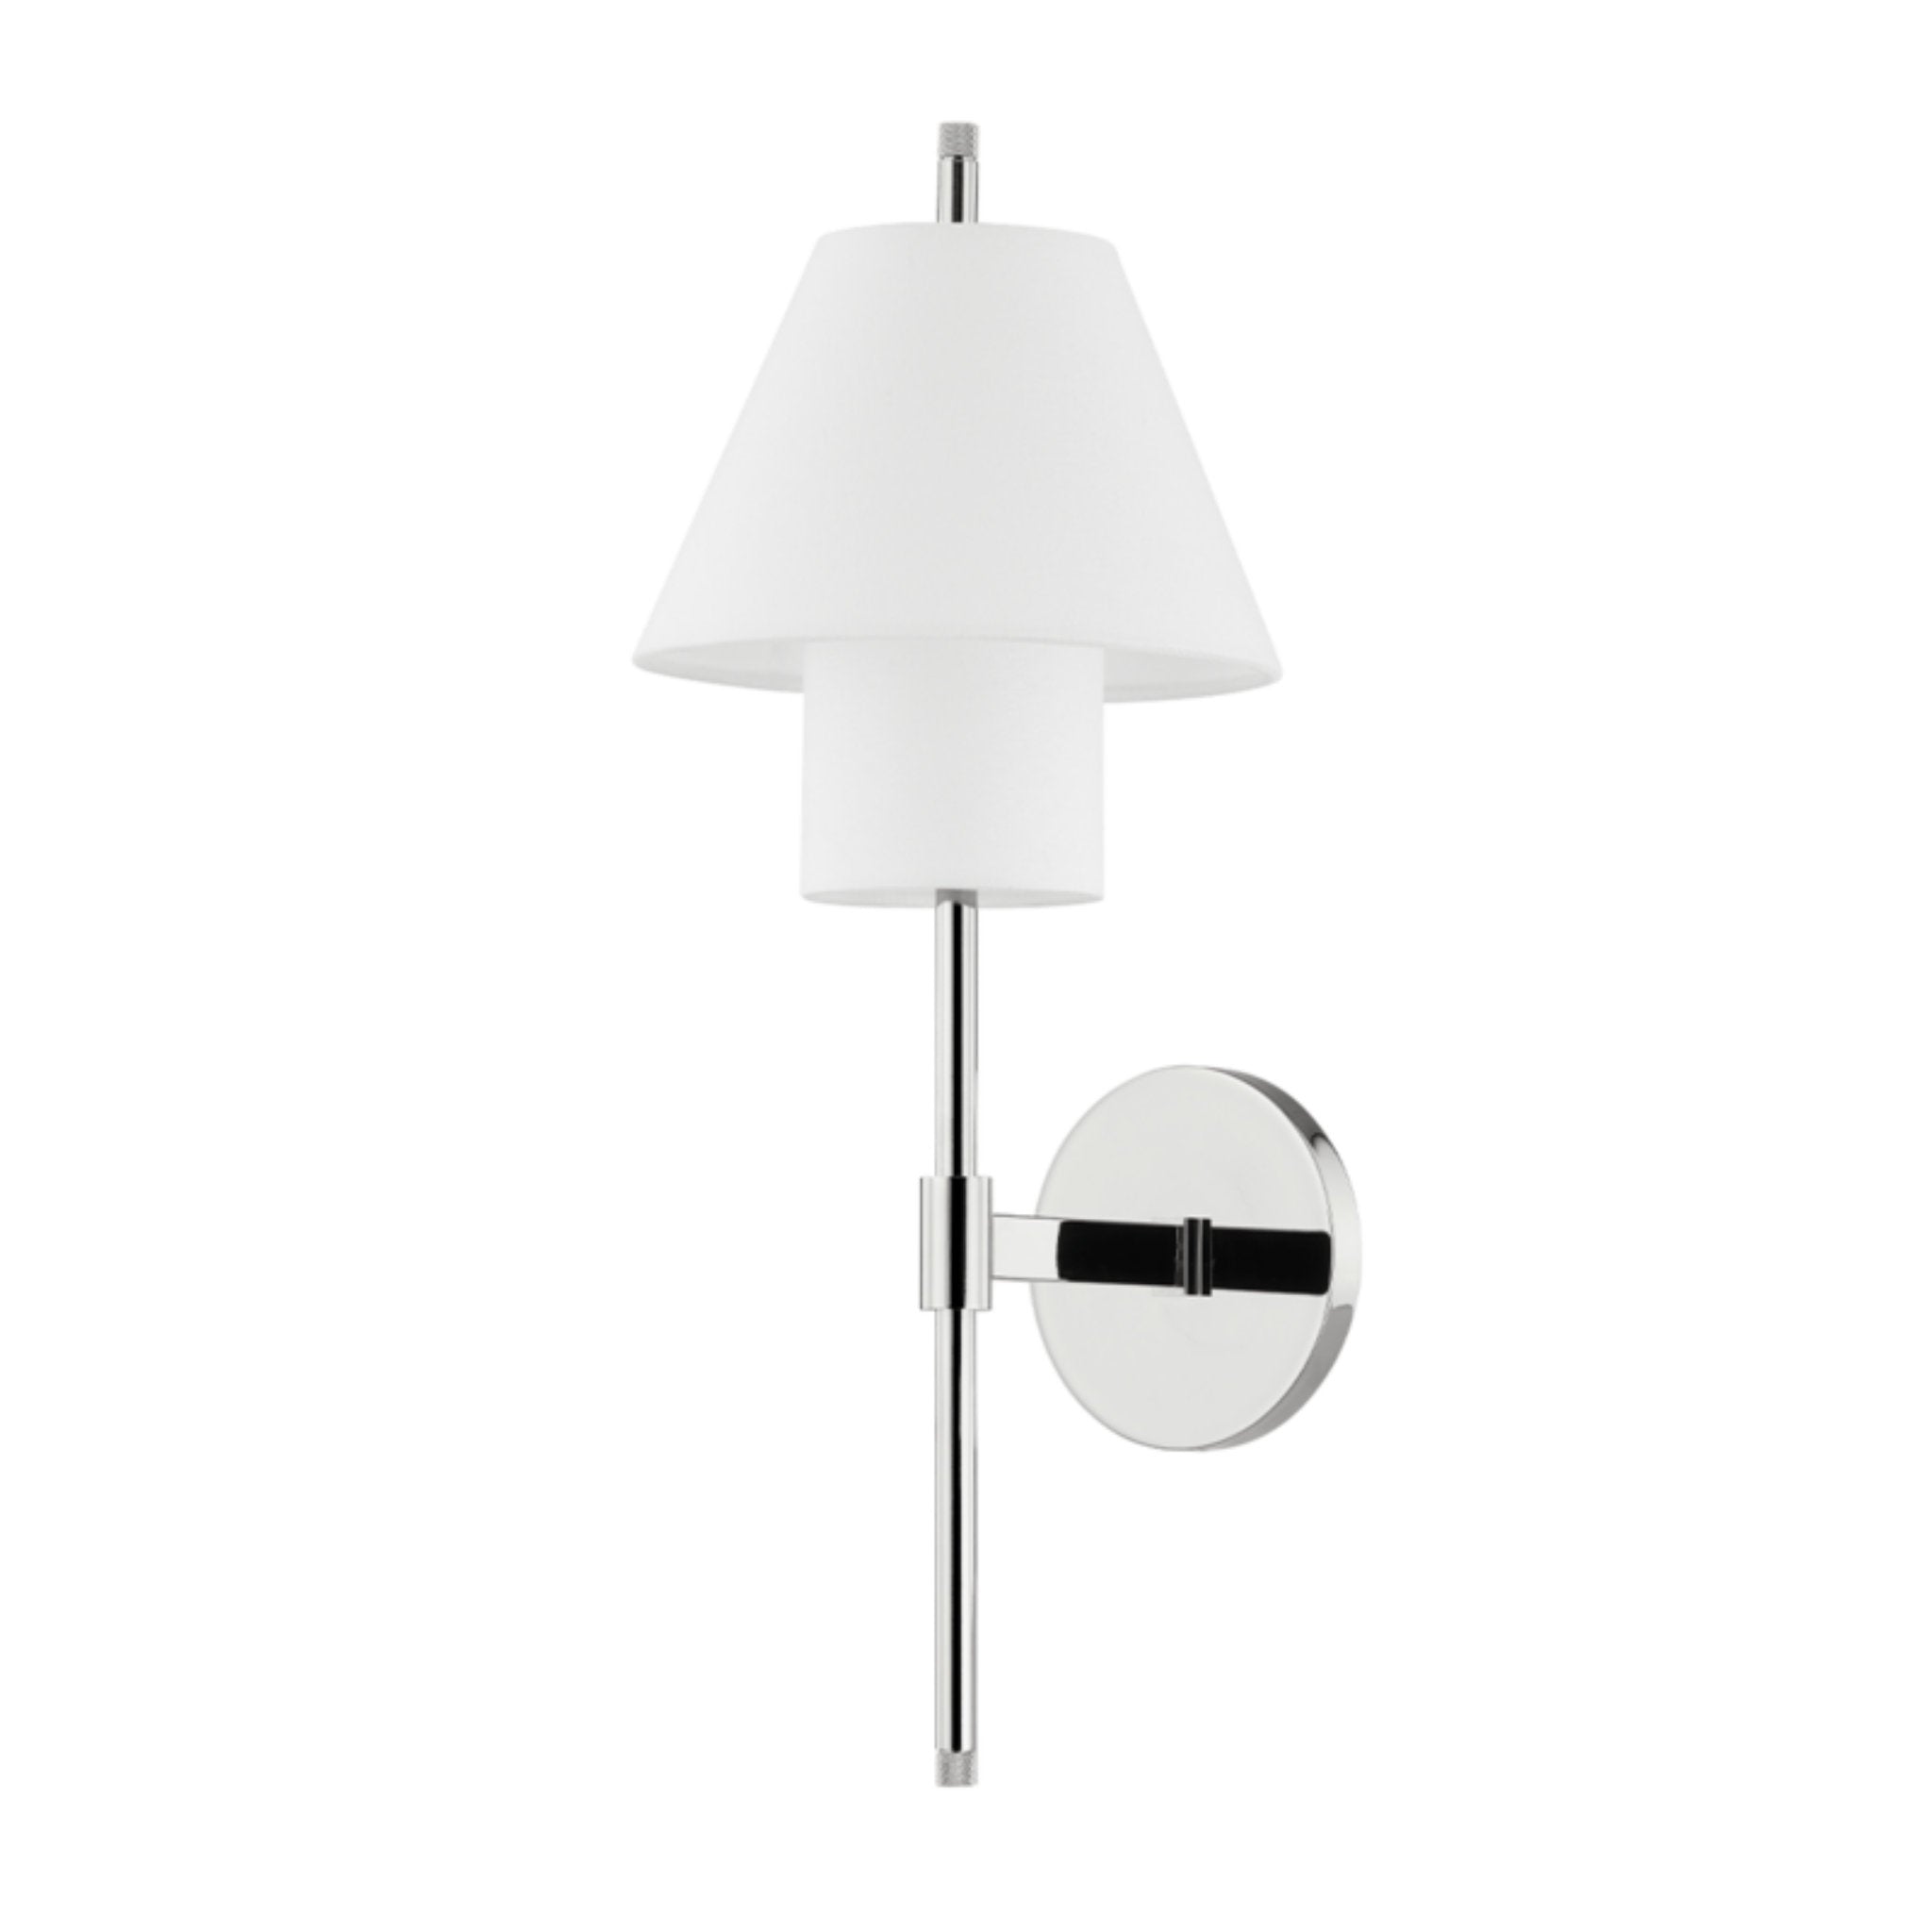 Glenmoore 1 Light Wall Sconce in Polished Nickel by Pembrooke & Ives